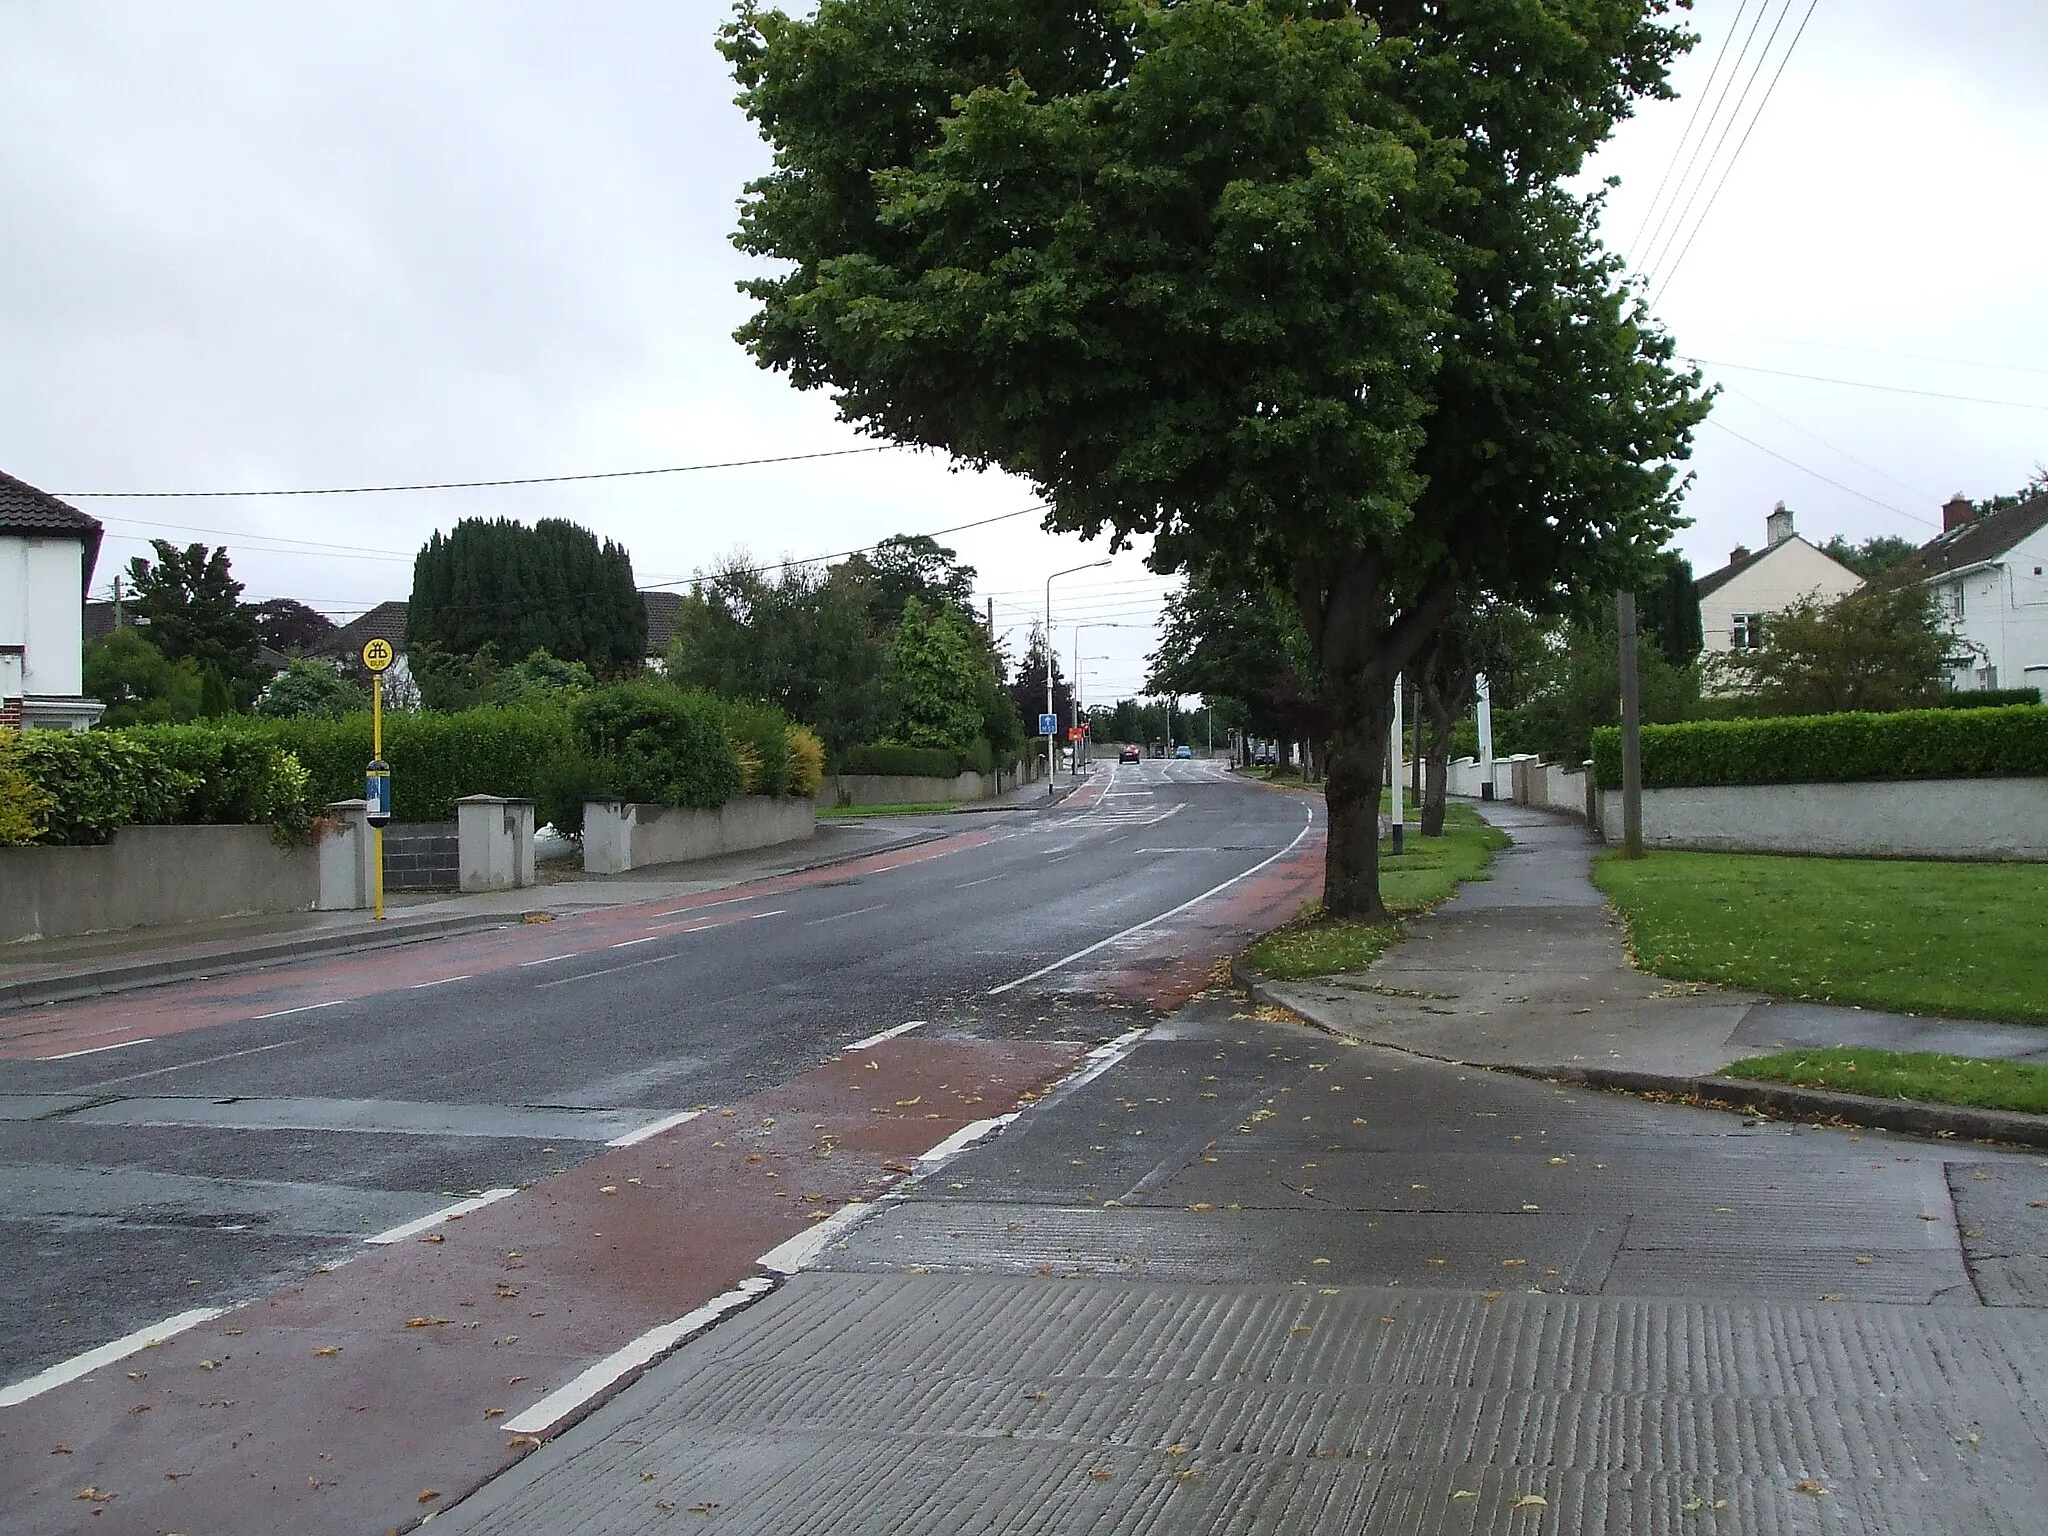 Photo showing: View facing south along the R825 road in Goatstown in Dublin in Ireland, at its intersection with Farmhill Park (right).